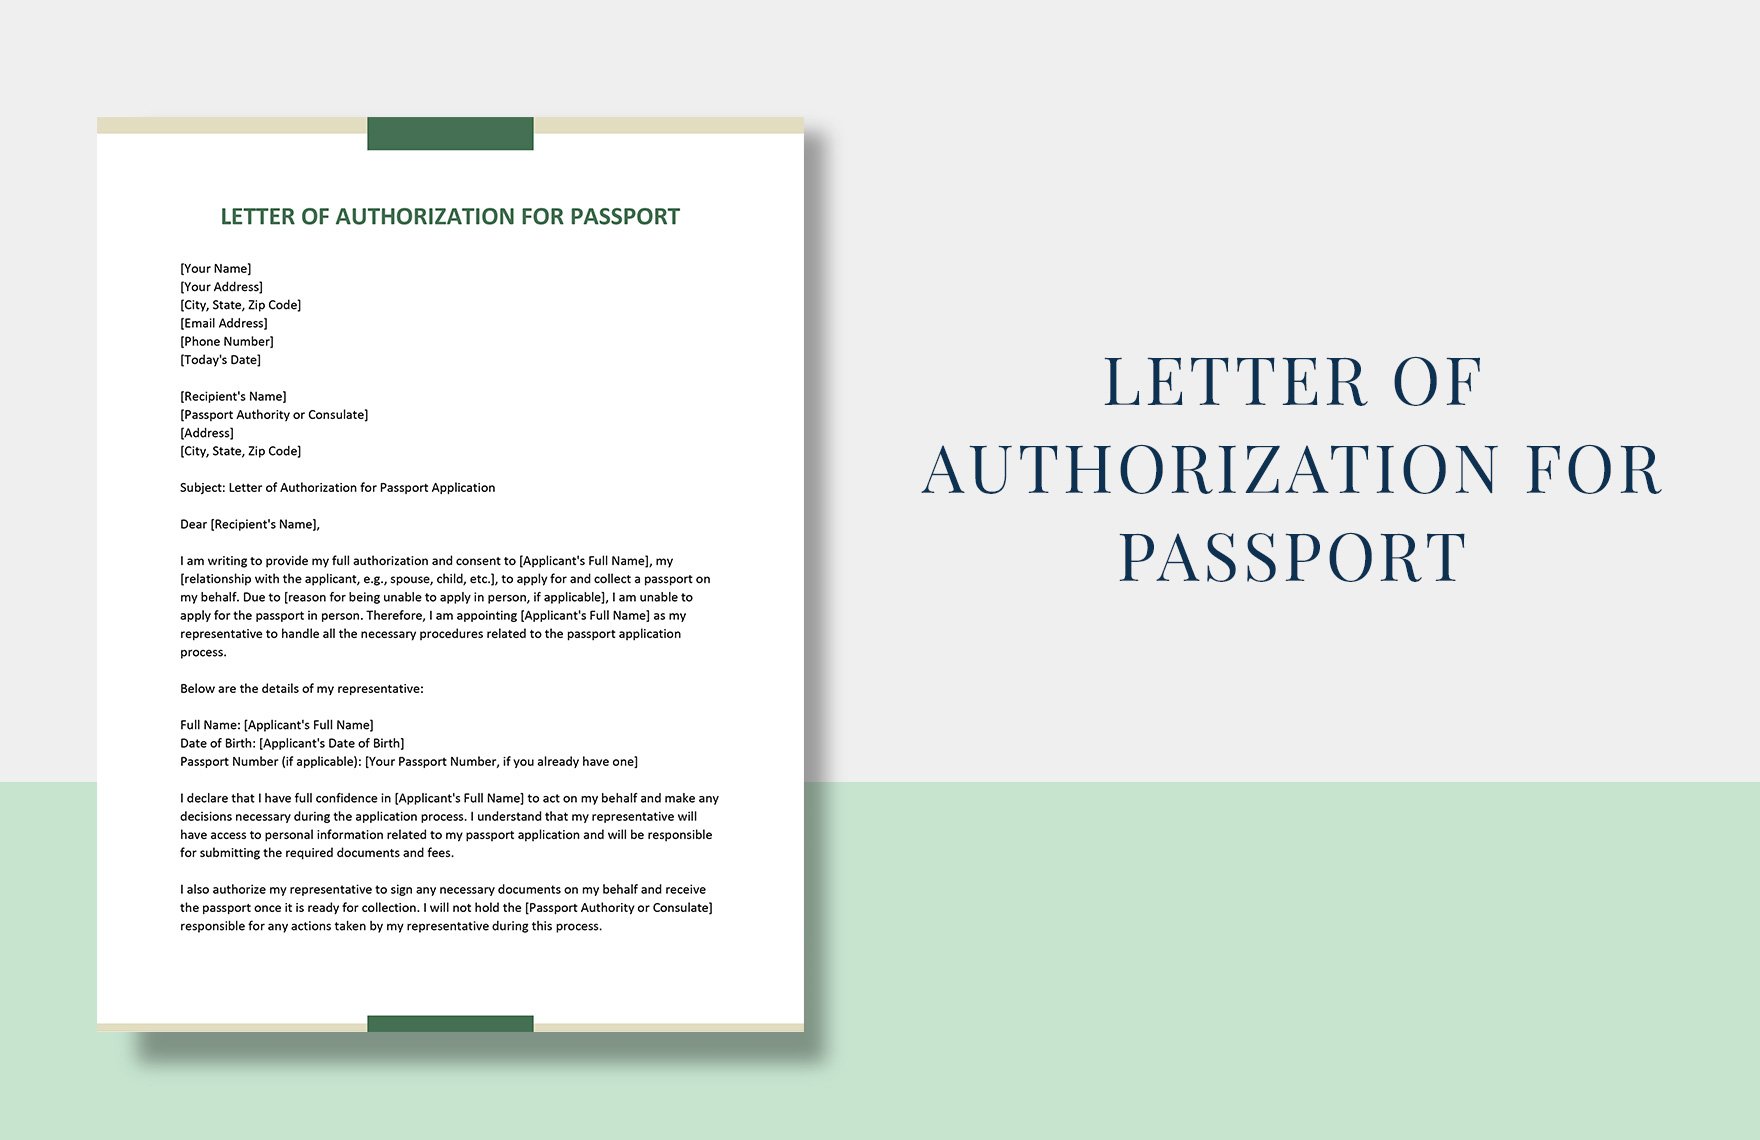 Letter of Authorization for Passport in Word, Google Docs, Apple Pages